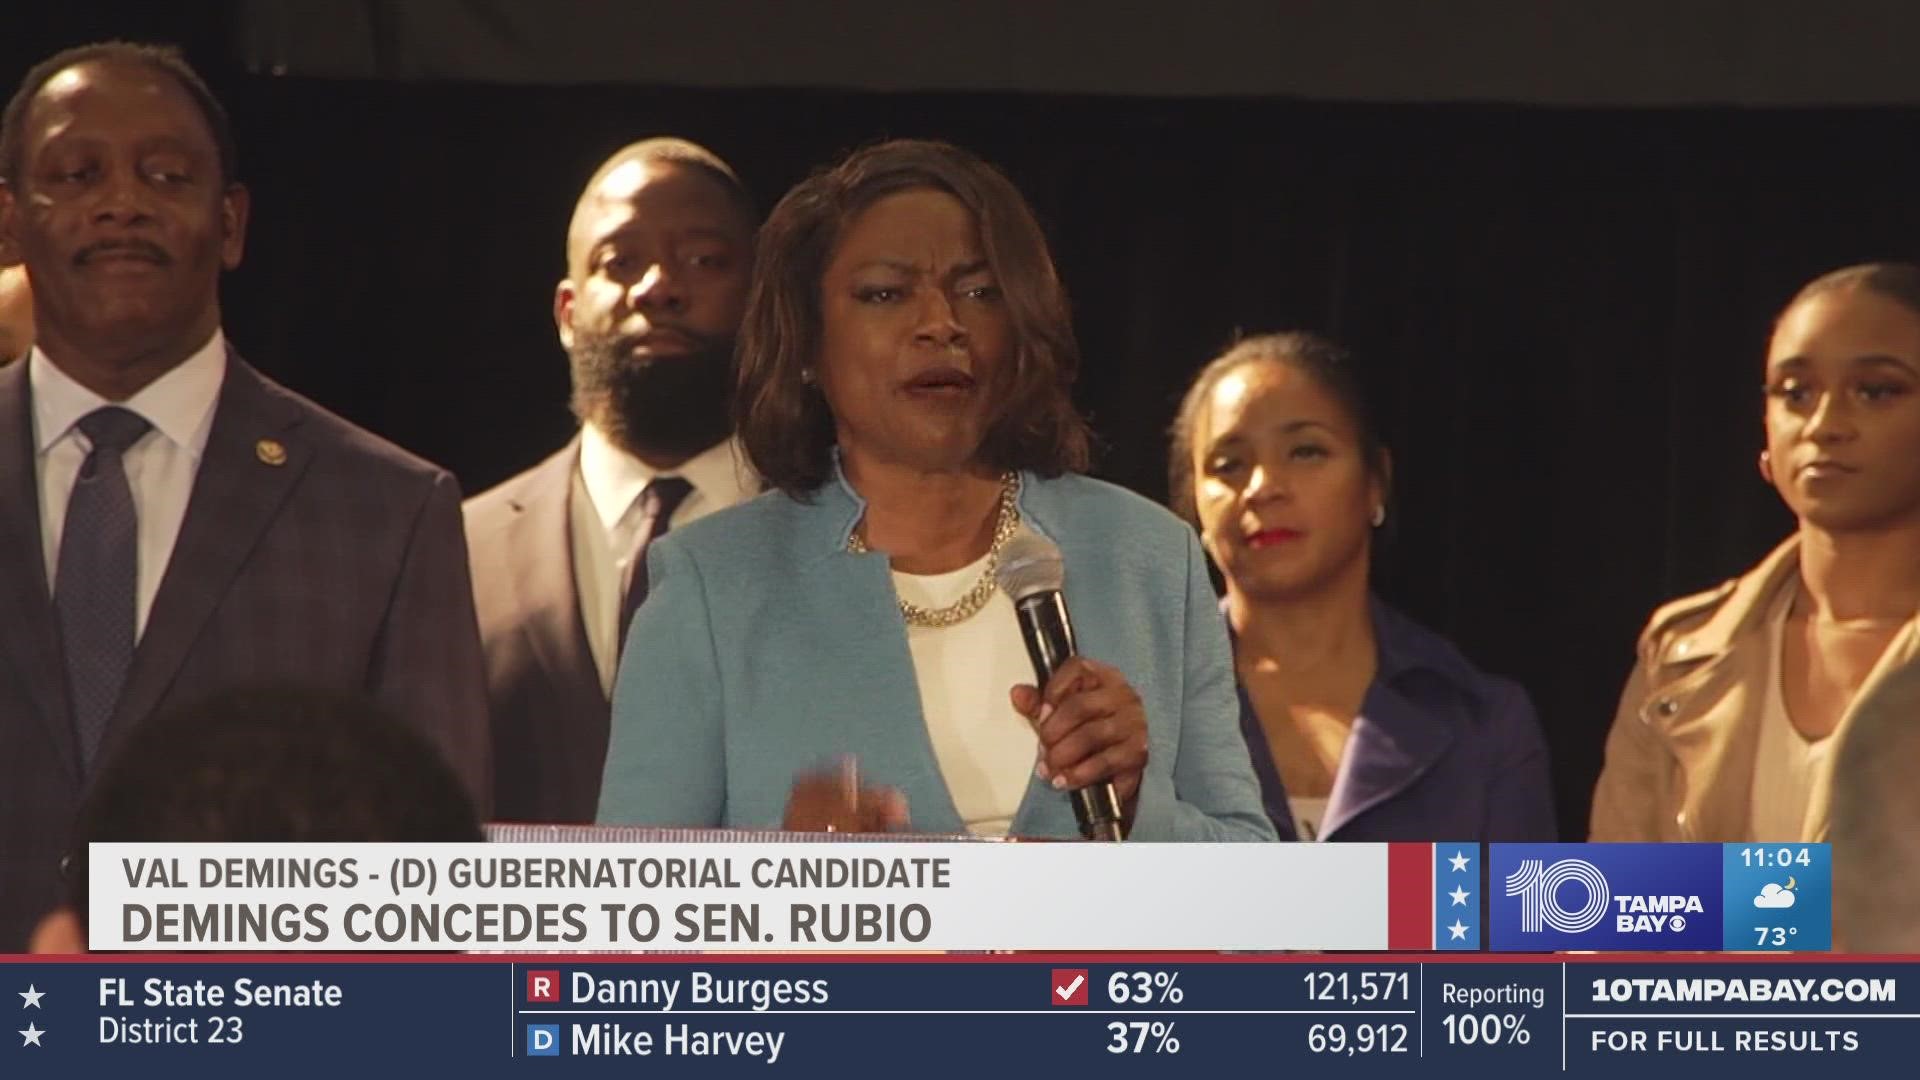 Early results show Rubio beating Demings by a large margin.